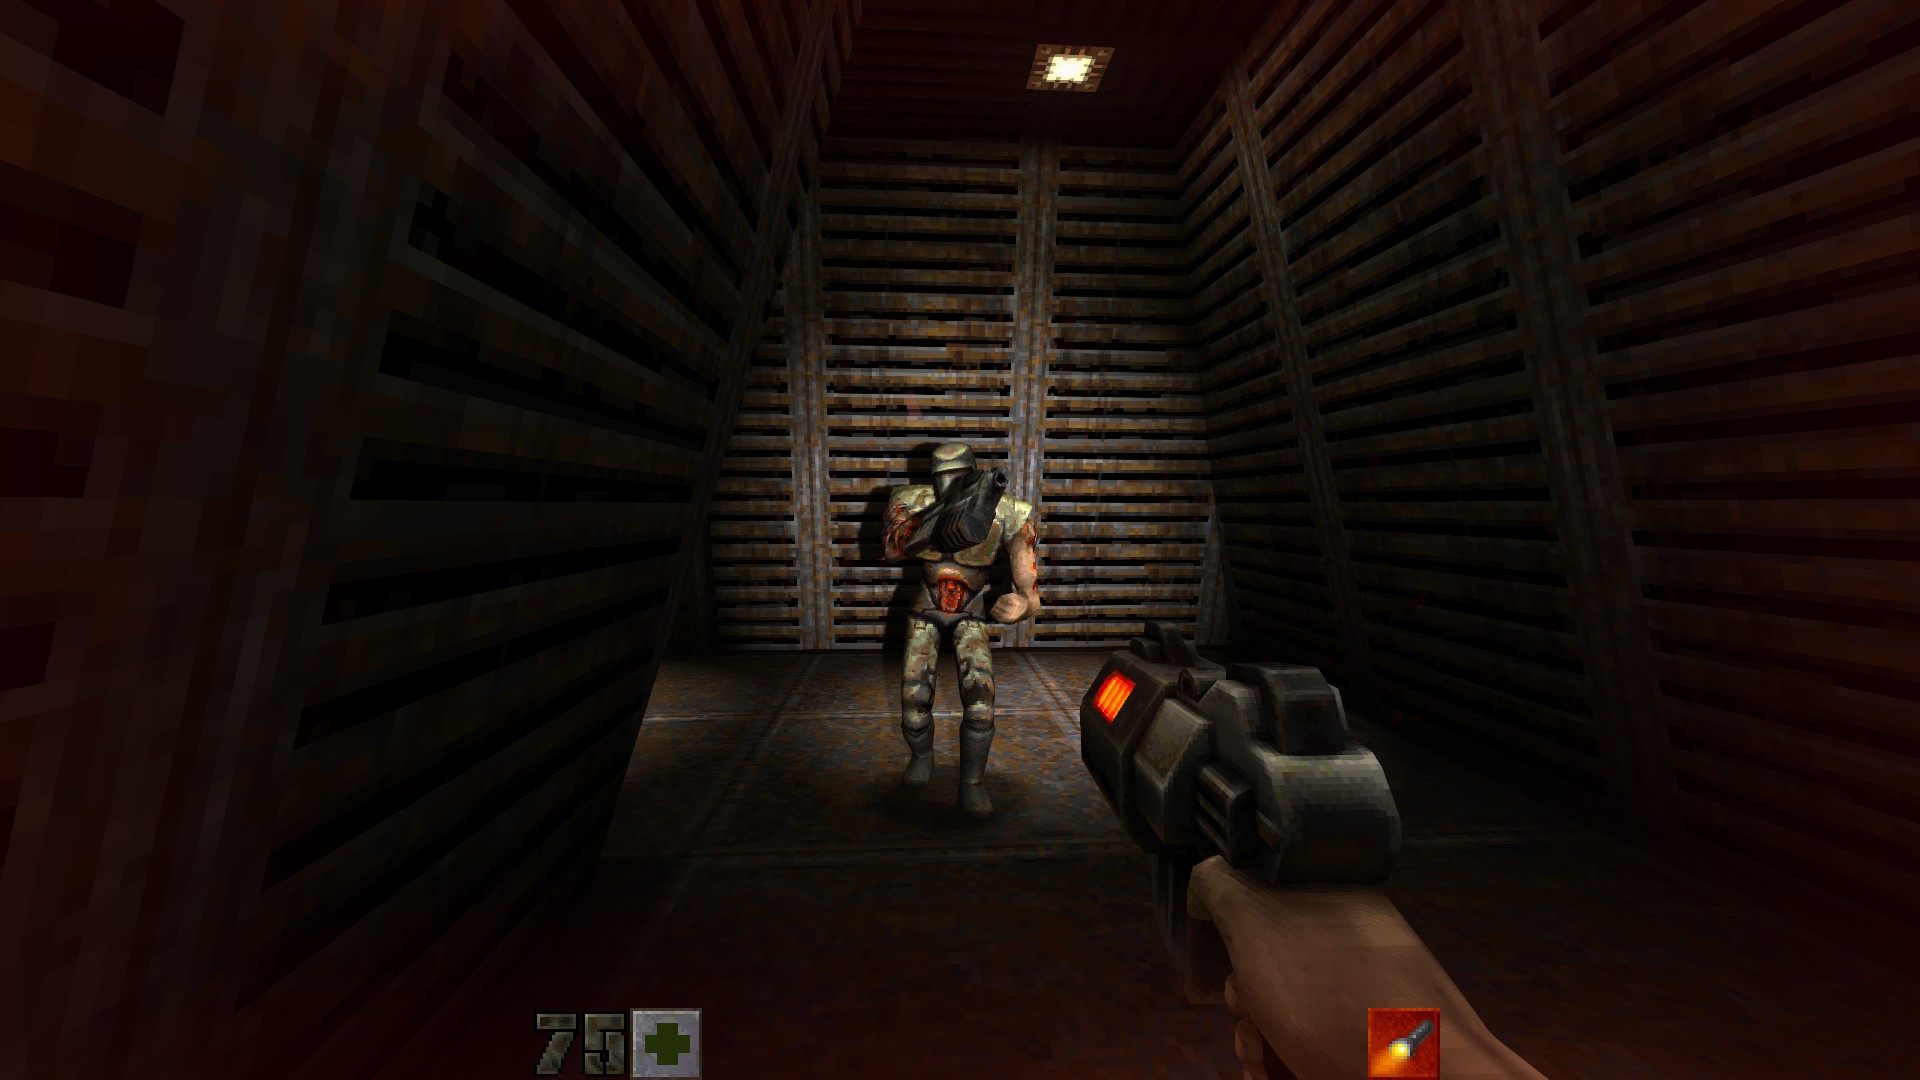 Quake II - How to Enable New Flashlight Guide - How to add the new Flashlight to your inventory. - 4BEC26C